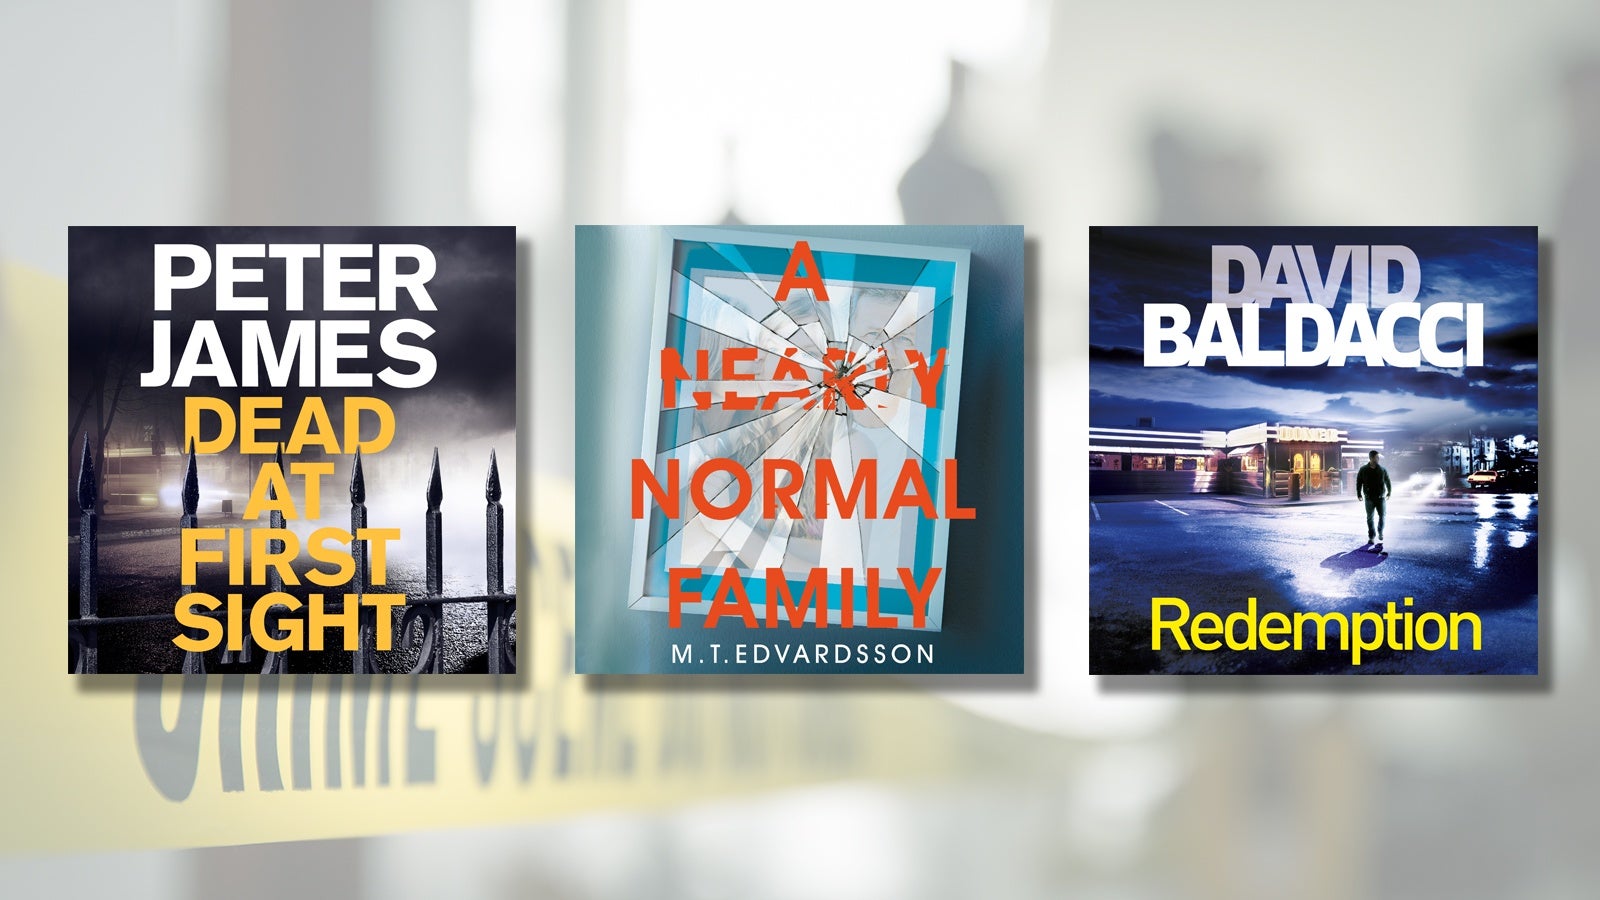 Book covers for Dead at First Sight, A Nearly Normal Family and Redemption